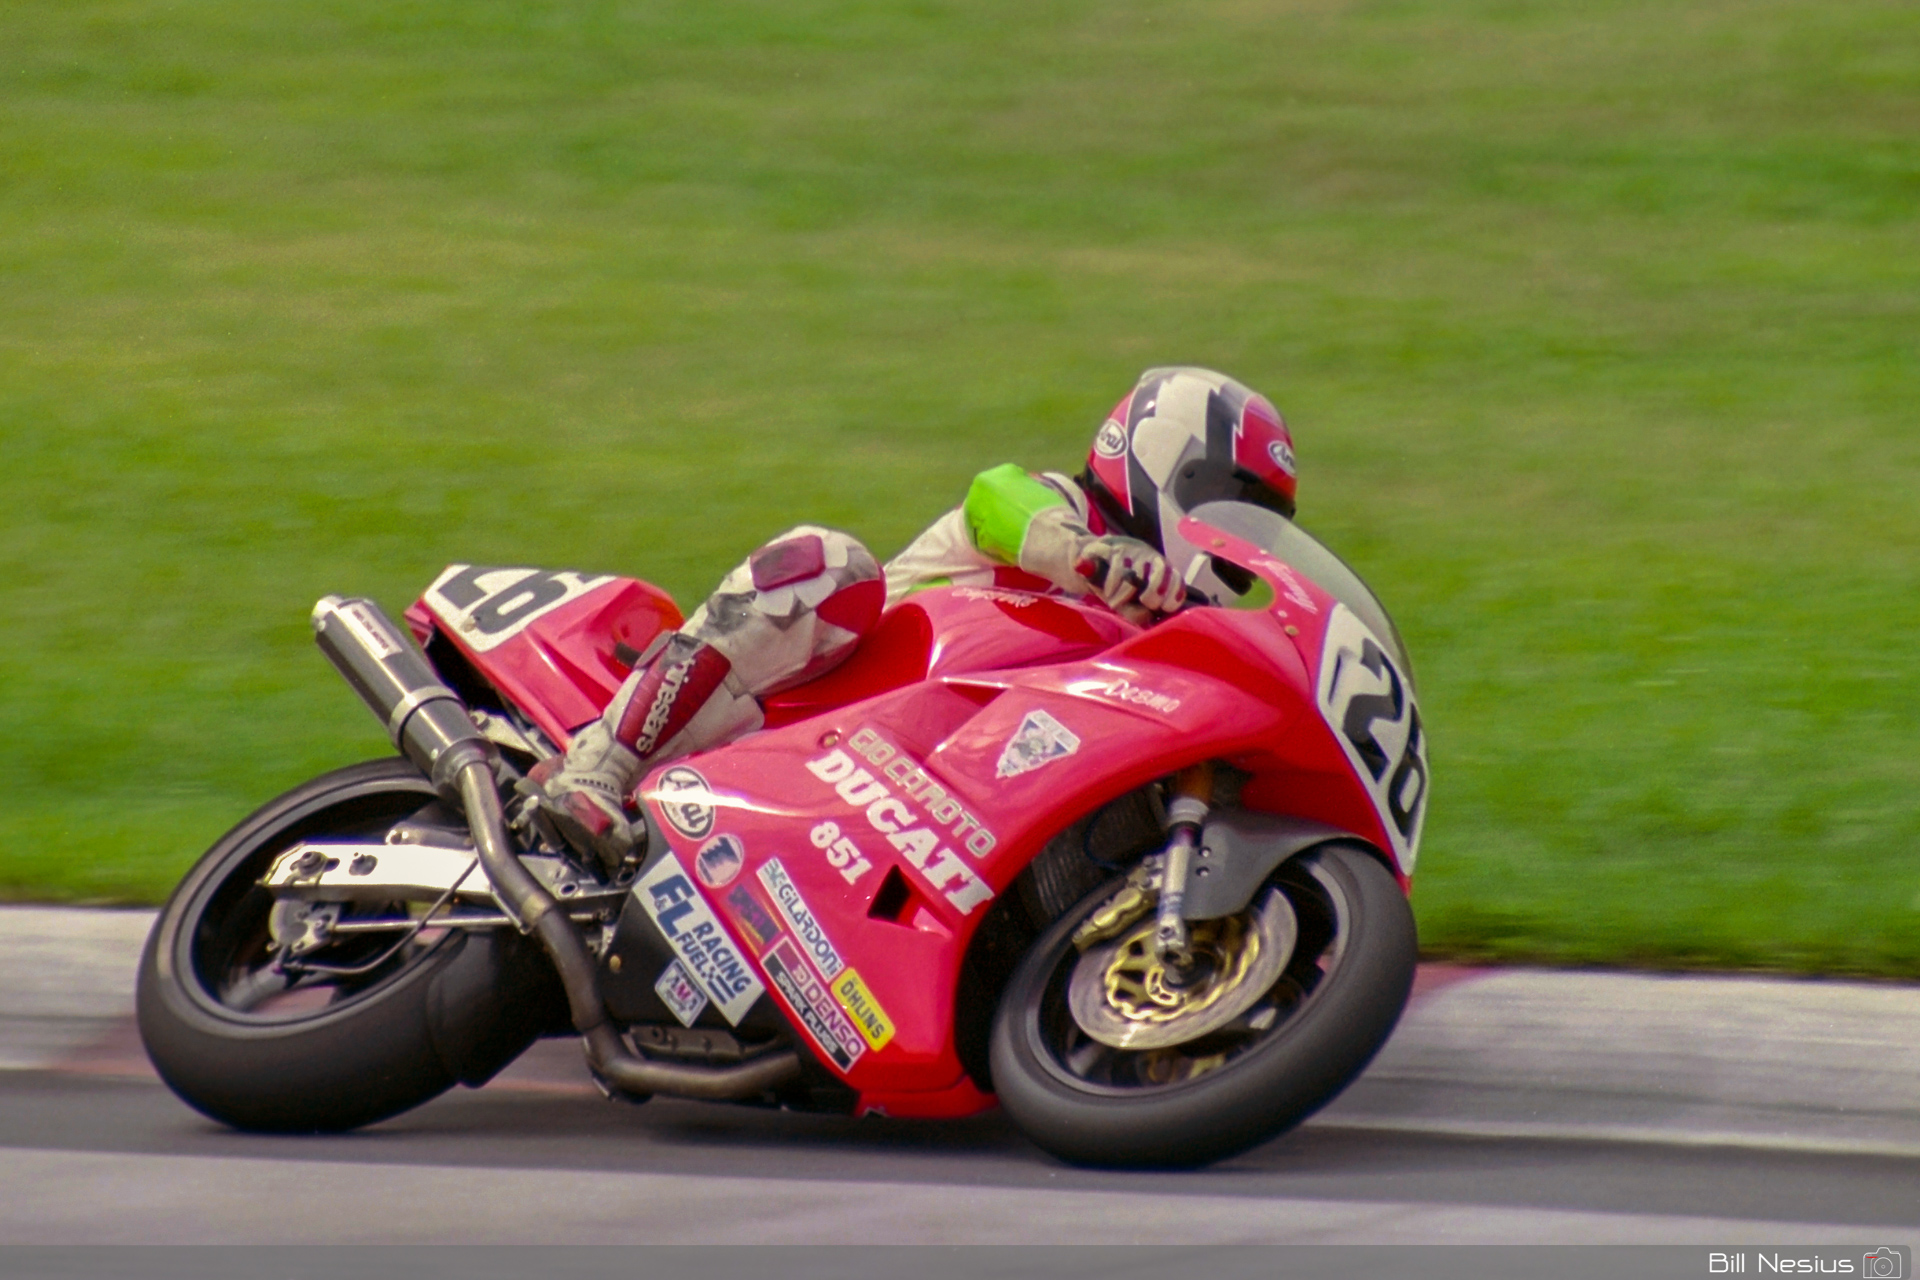 Jimmy Adamo on a the Number 26 Ducati 851 / FLM_5868 / 3